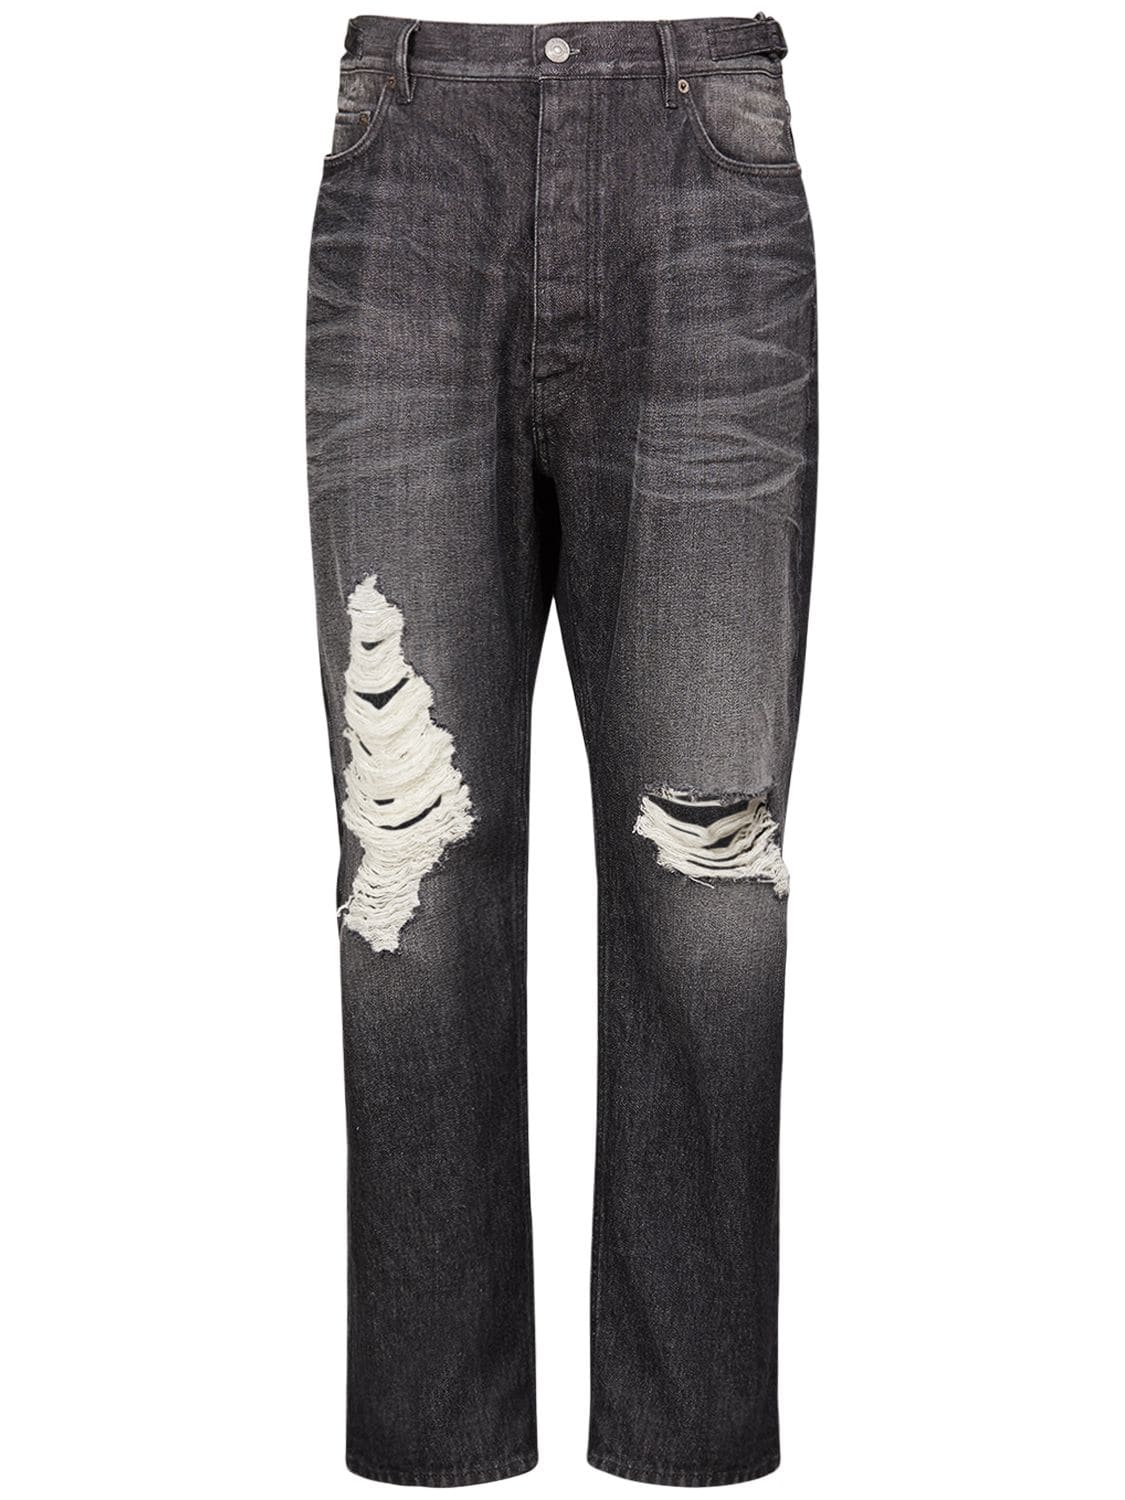 BALENCIAGA Relaxed Fit Ripped Cotton Jeans